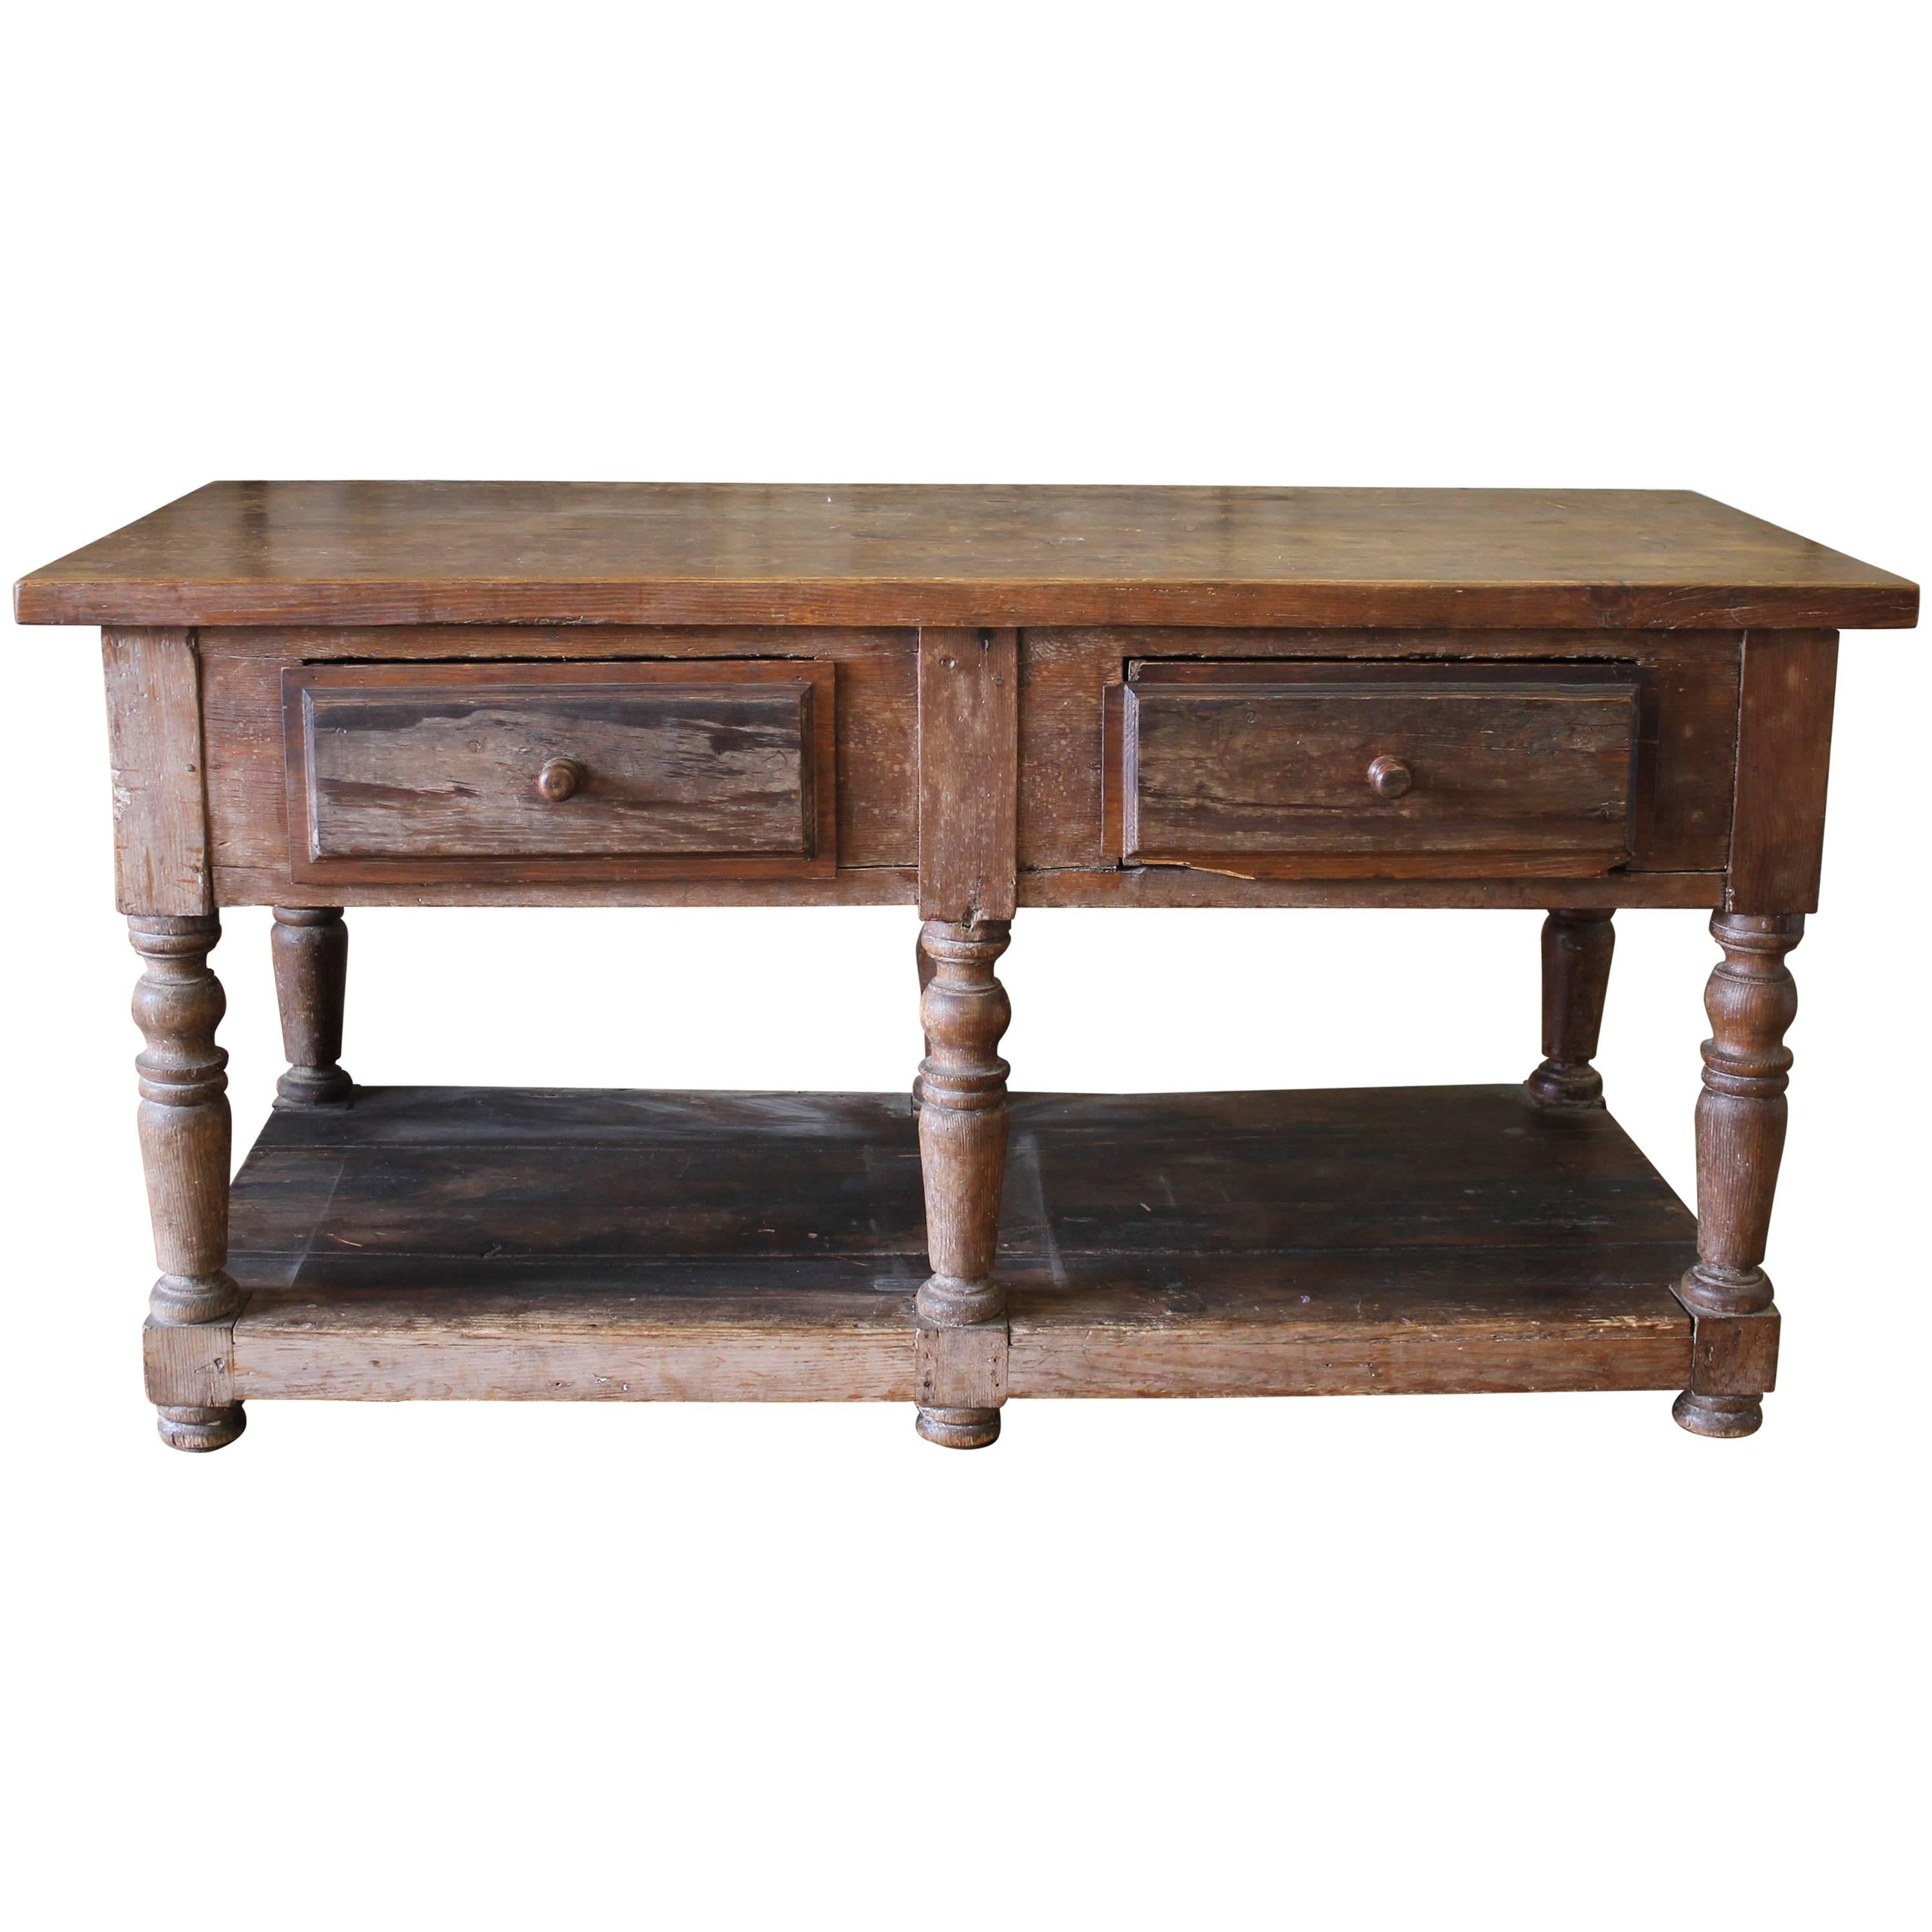 19th Century Antique French Drapers Table with Drawers